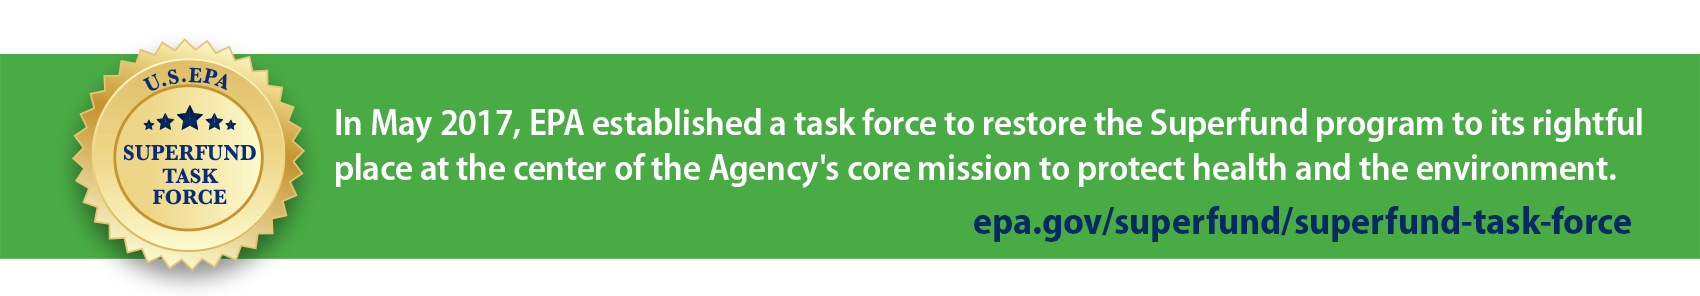 In May 2017, EPA established a task force to restore the Superfund program to its rightful place at the center of the Agency's core mission to protect health and environment.